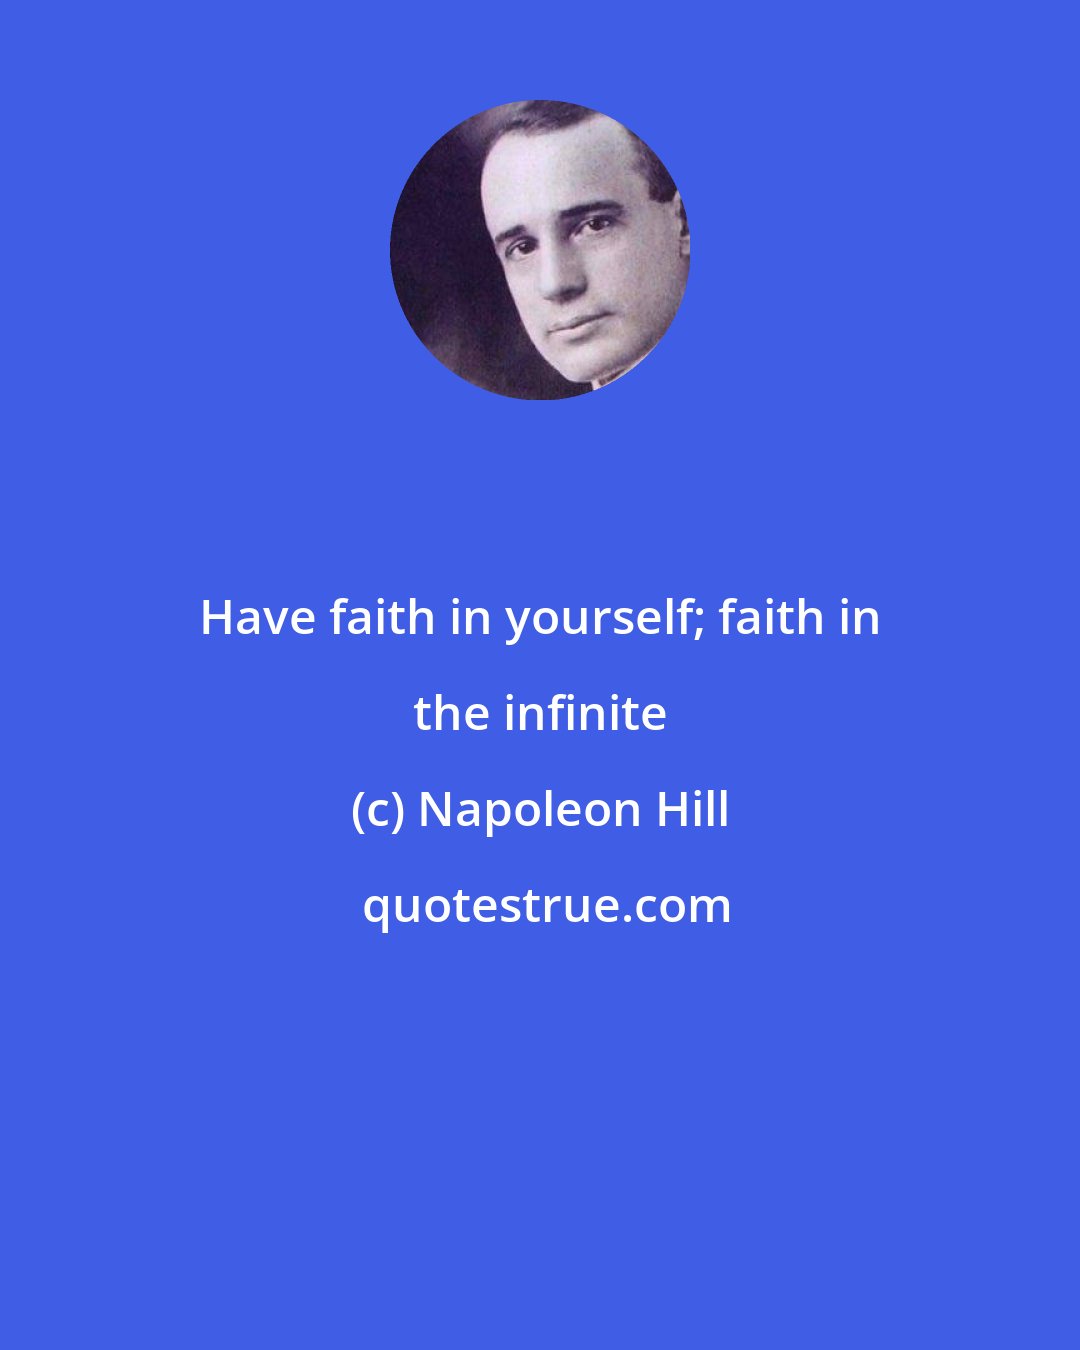 Napoleon Hill: Have faith in yourself; faith in the infinite